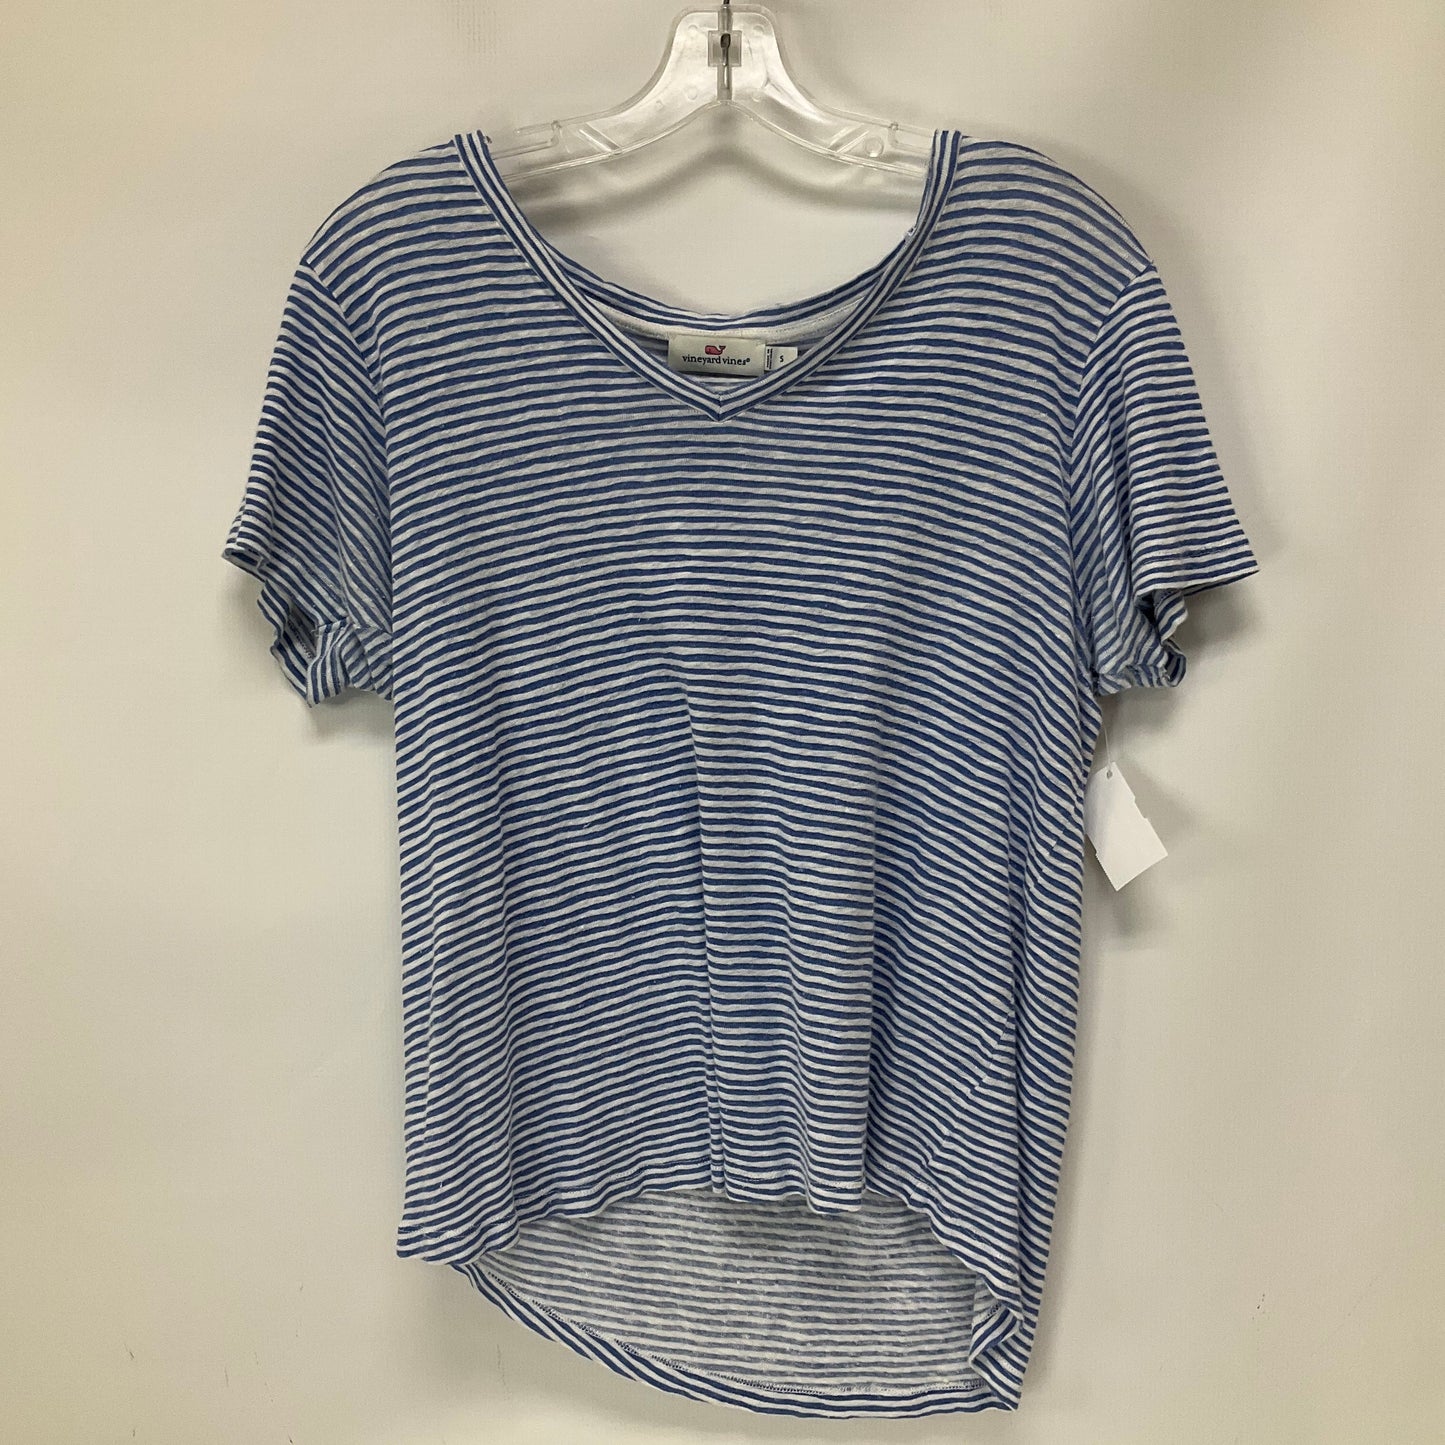 Top Short Sleeve Basic By Vineyard Vines  Size: S